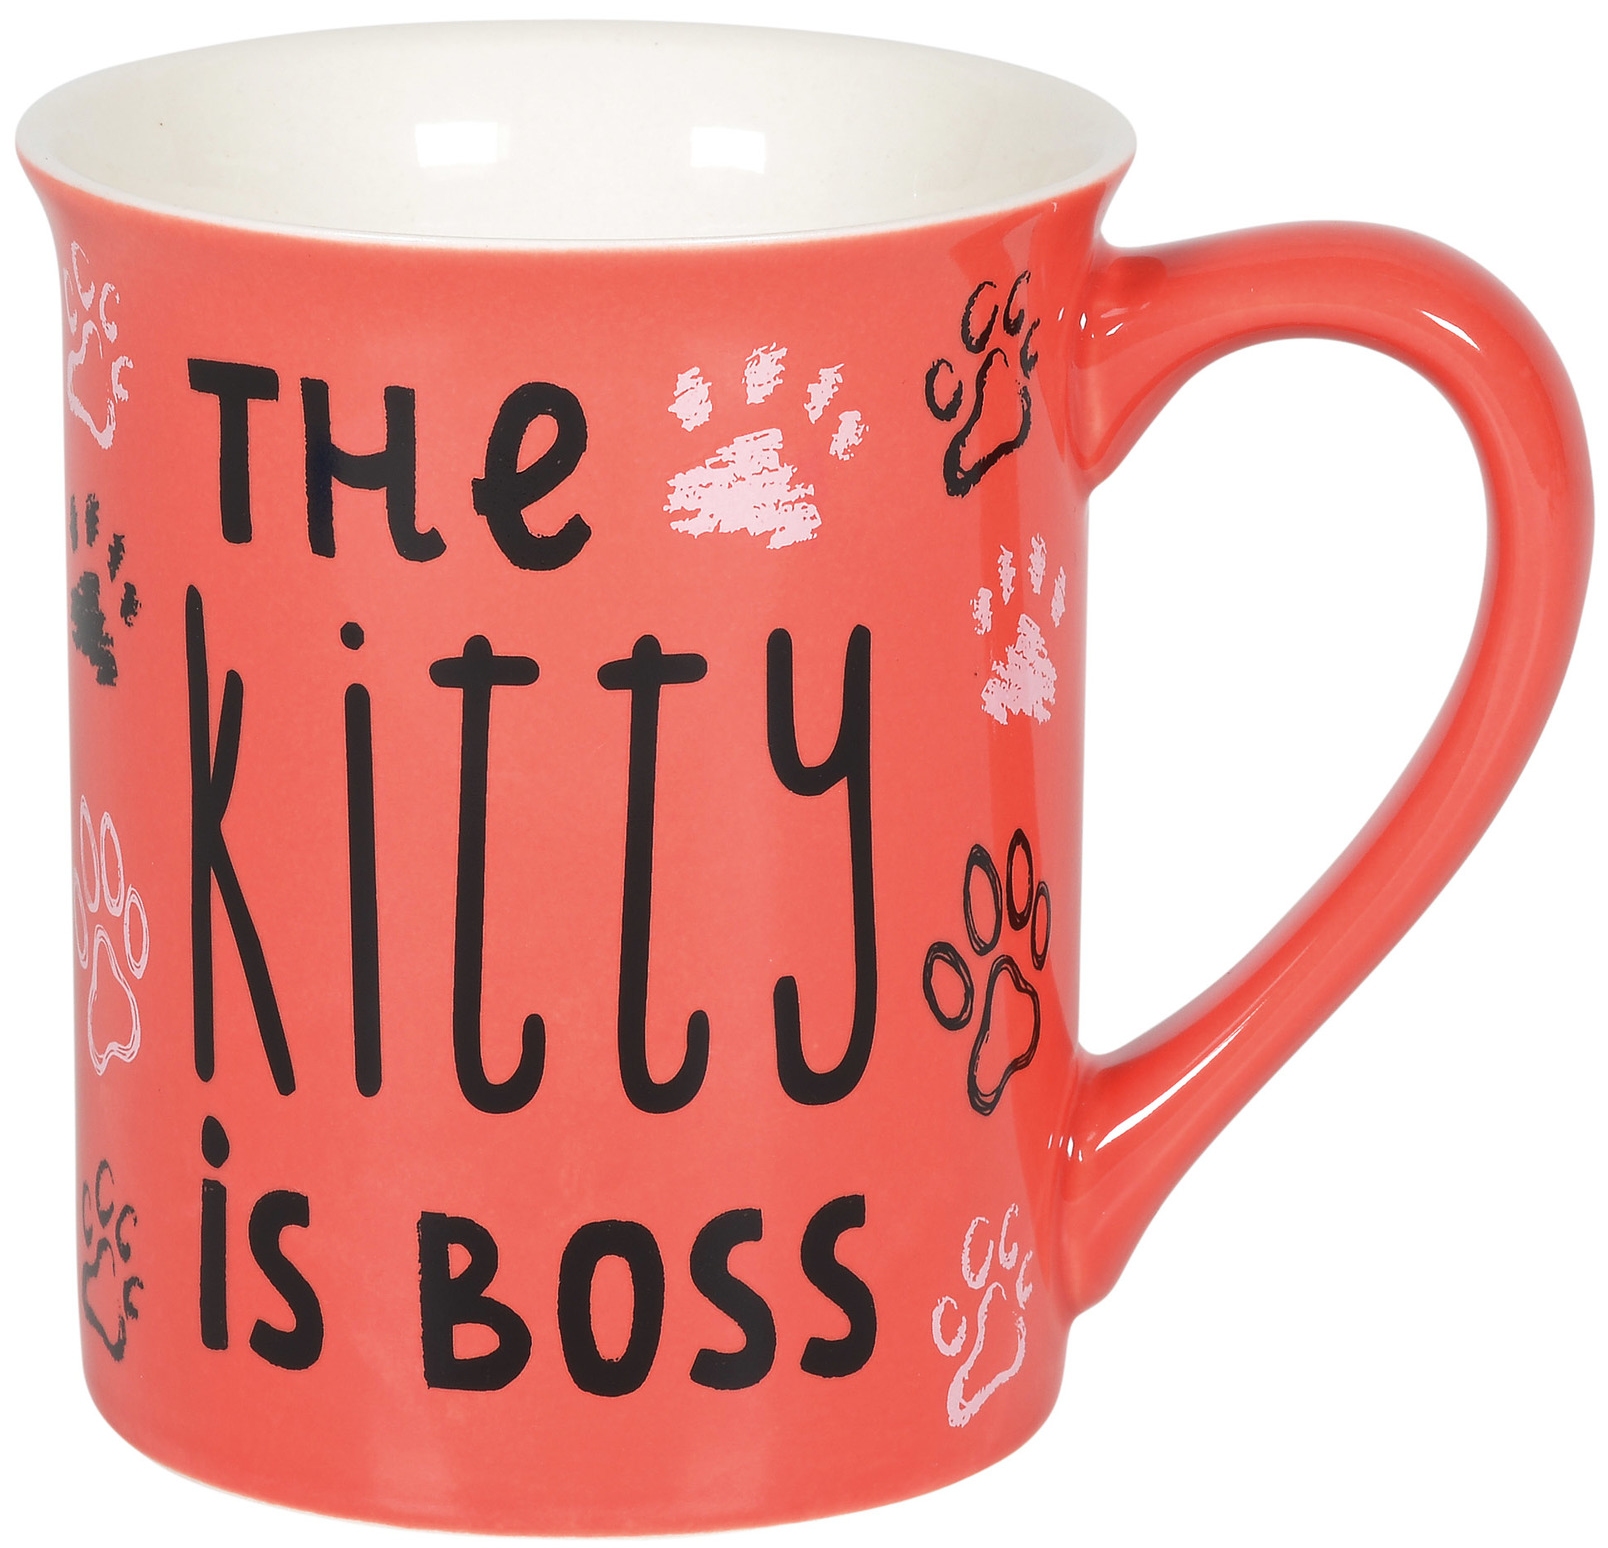 Our Name Is Mud 6005725 Kitty Is Boss Mug